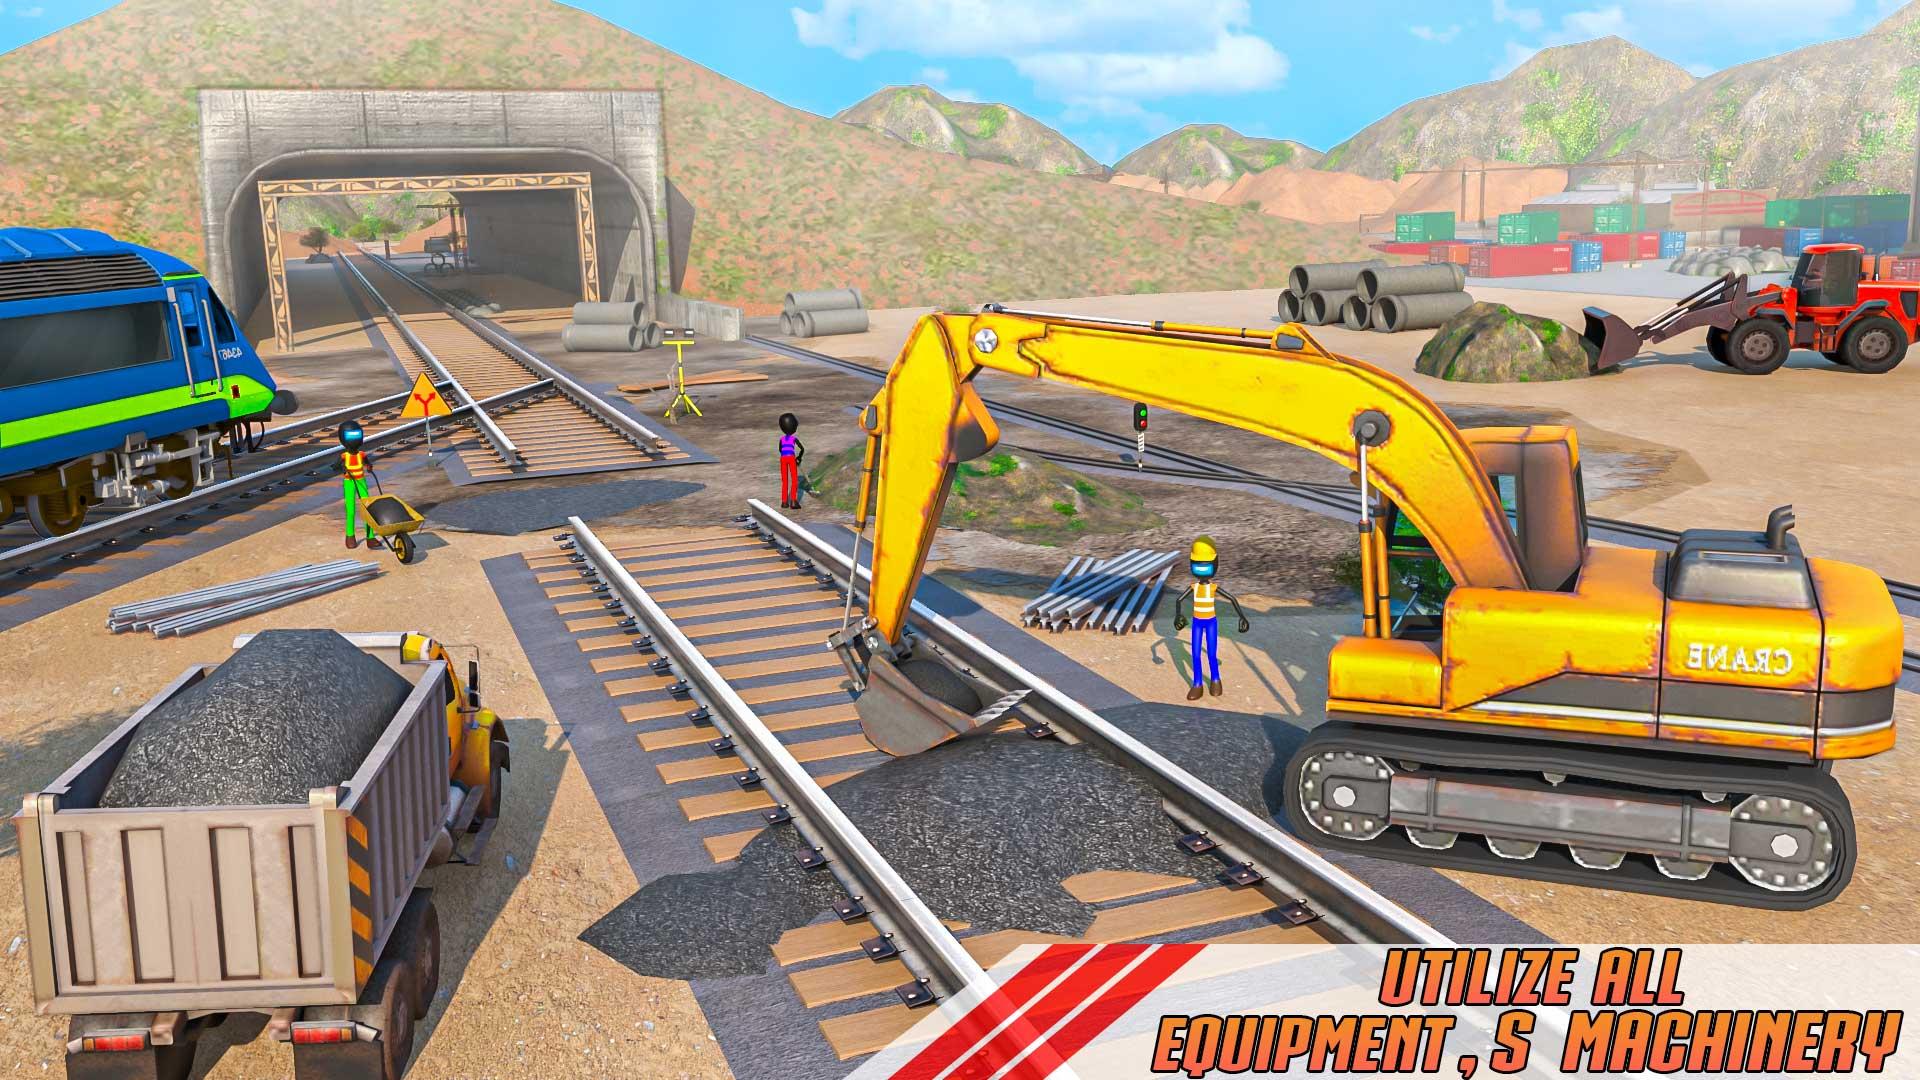 Grand Construction Excavator: Red Imposter Game 1.0 Screenshot 12